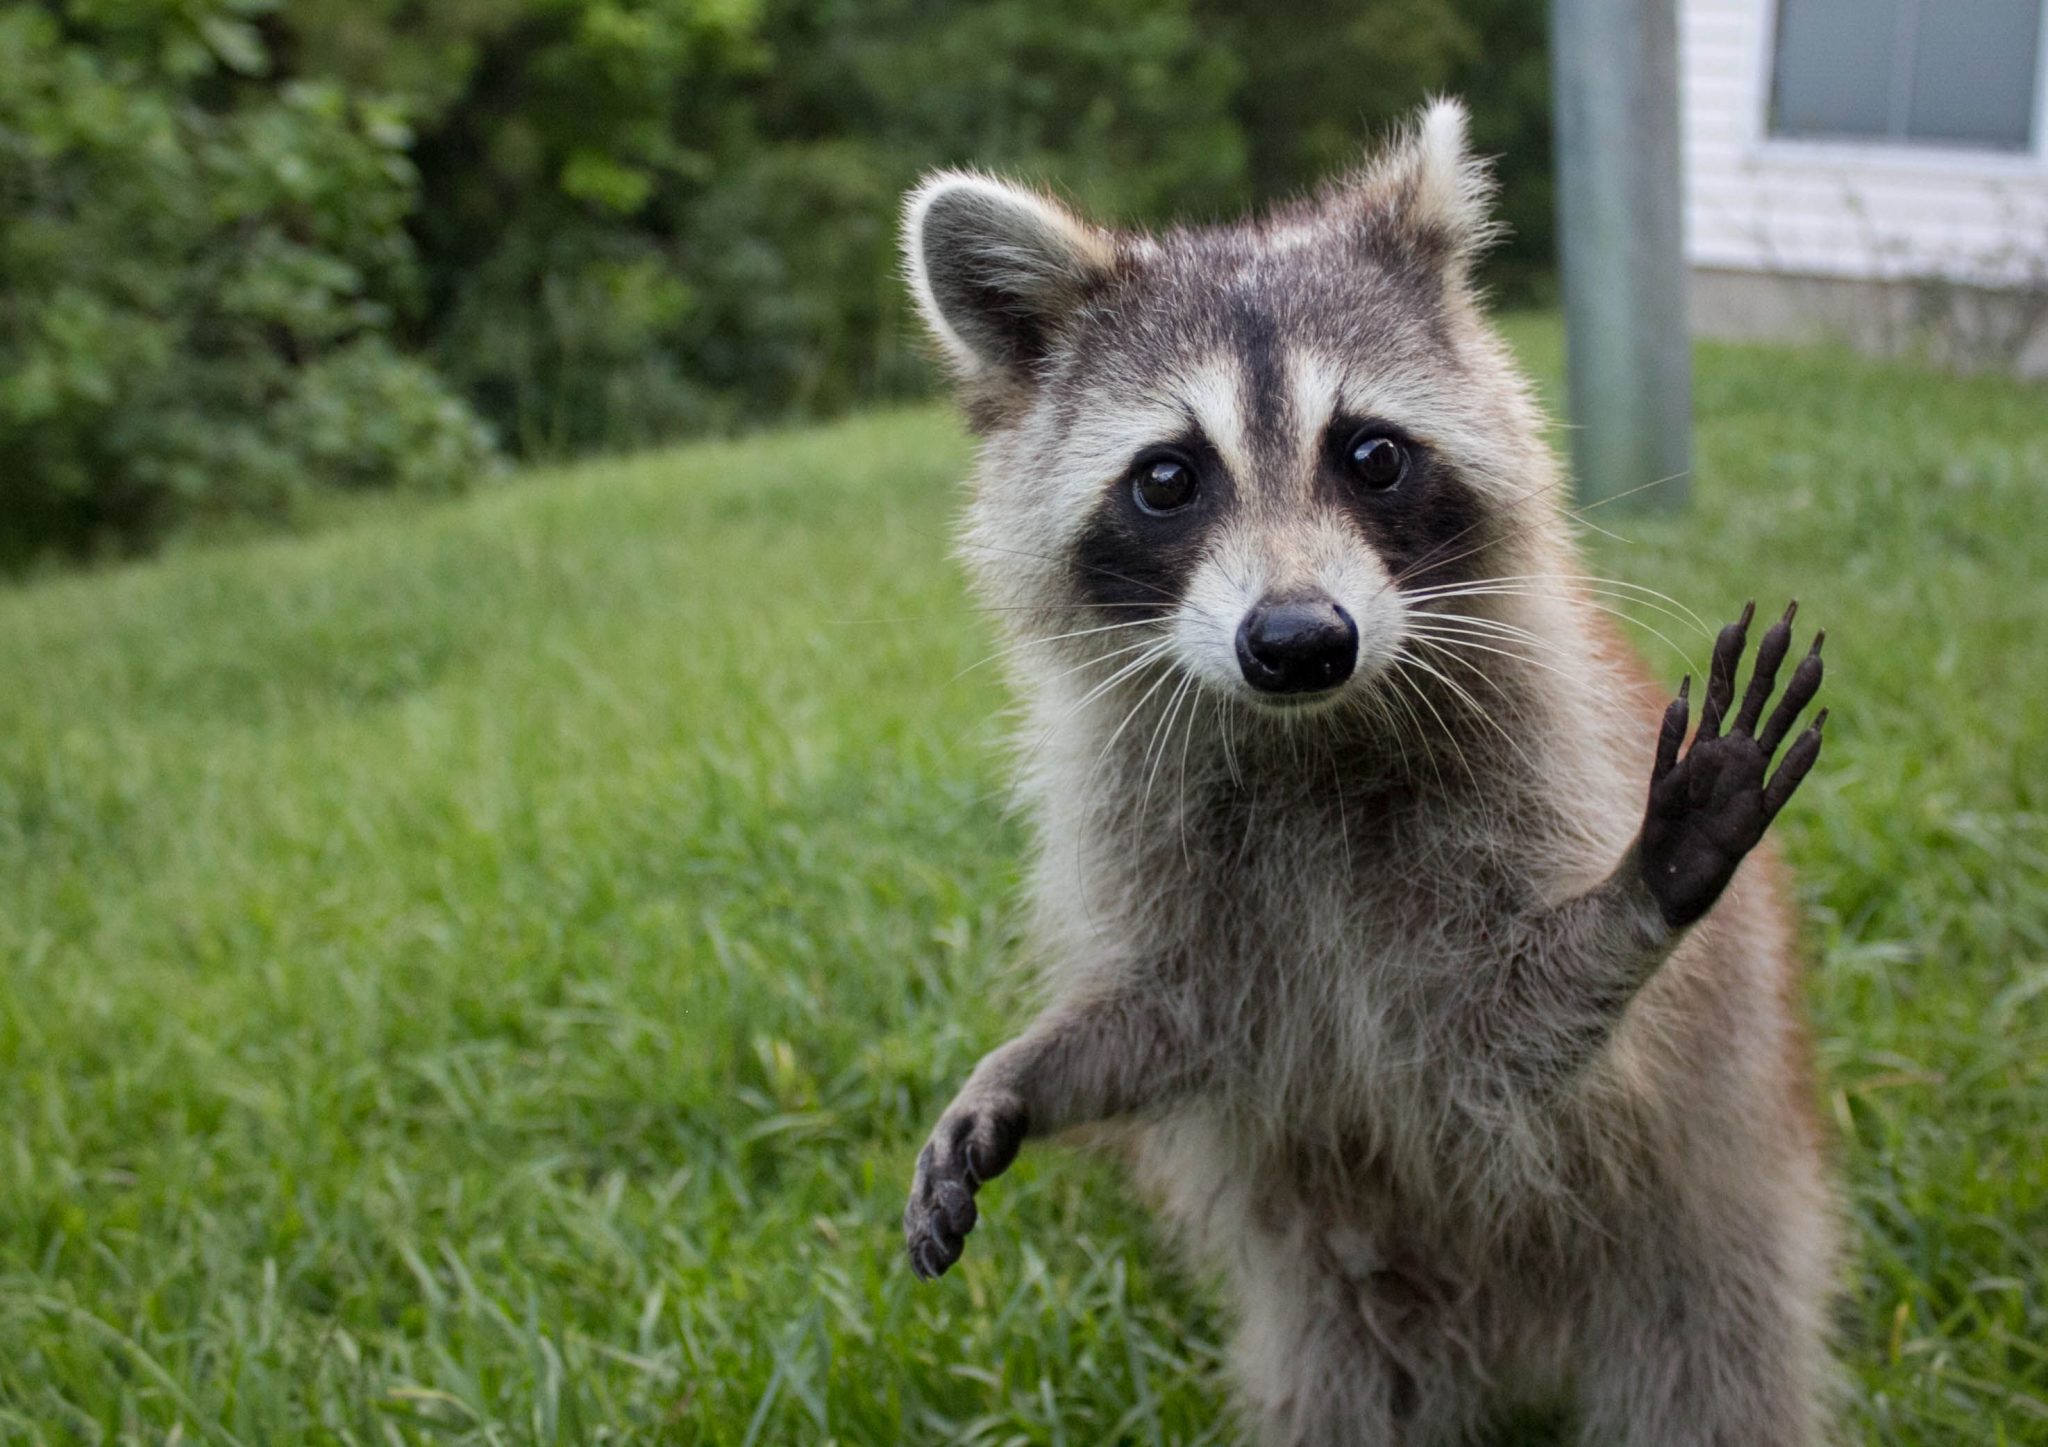 Domesticated Raccoon: What States is it Legal to Have A Pet Raccoon